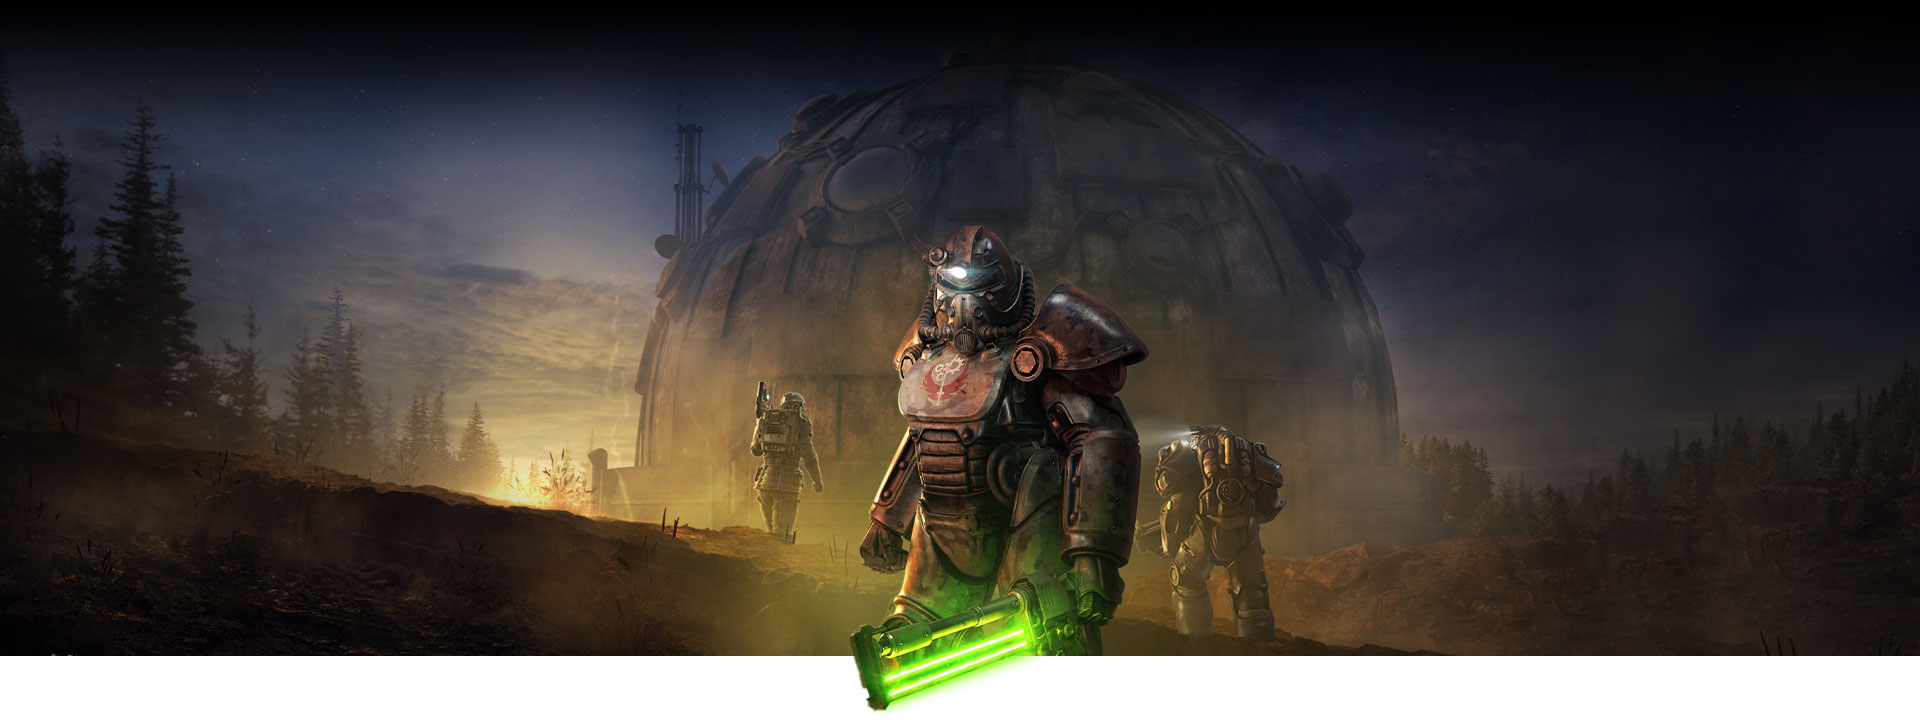 Character in Power Armor holds a glowing melee weapon in front of a large dome building